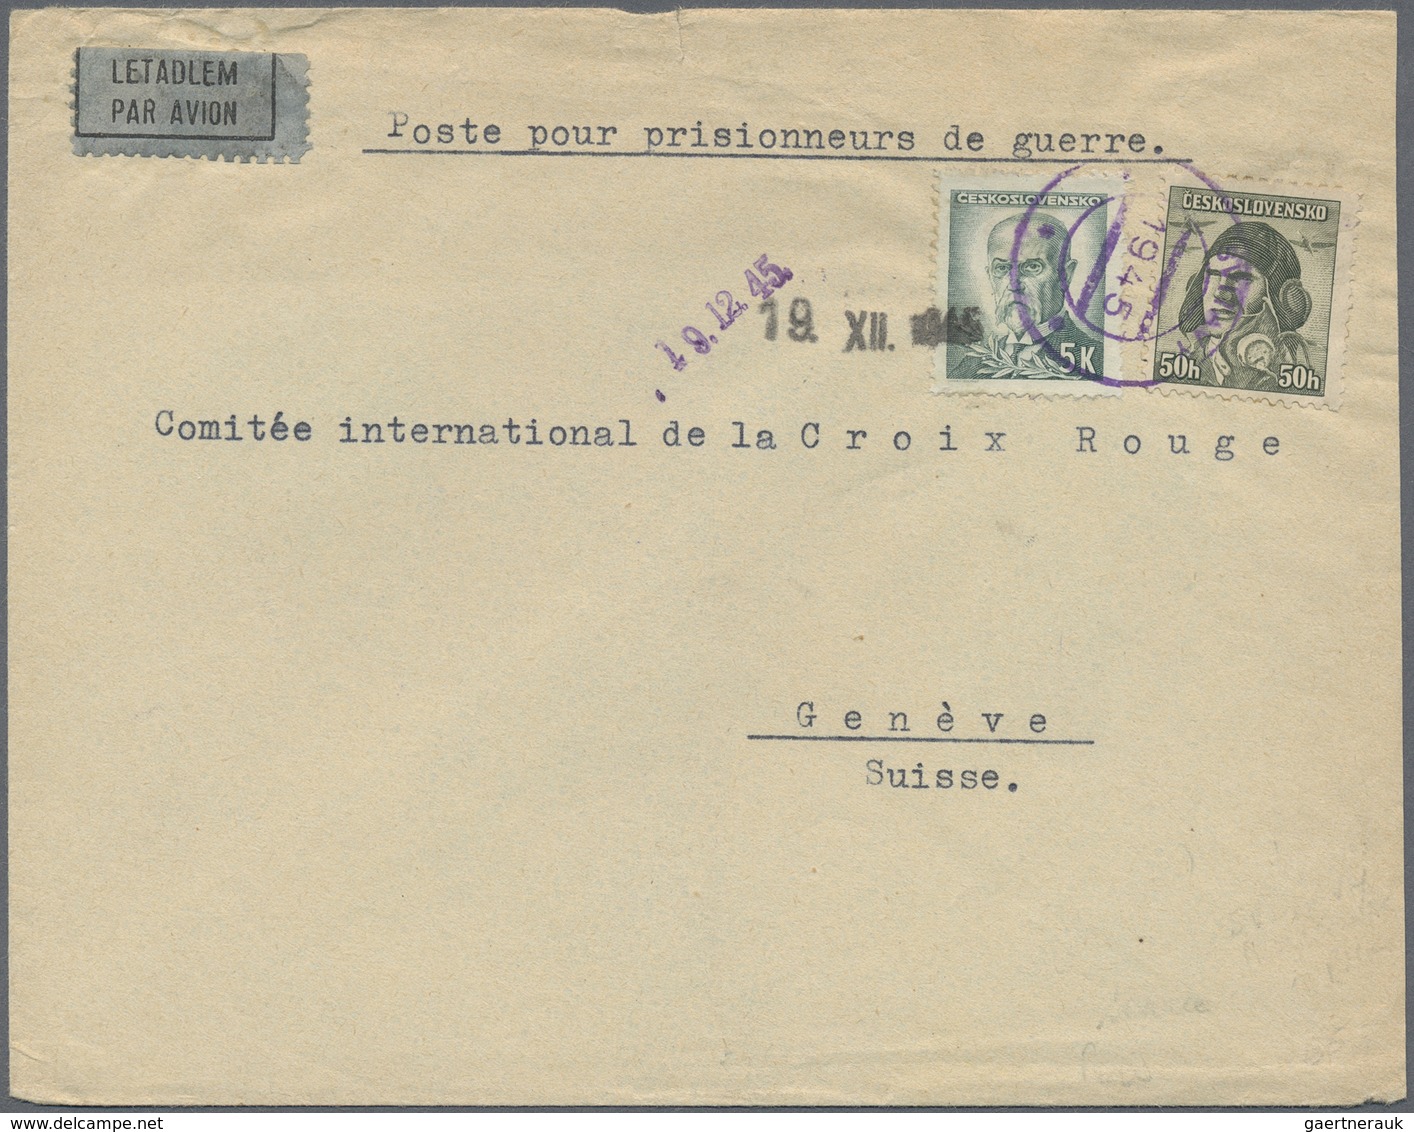 Br Tschechoslowakei: 1945, 50 H Olive And 5 K Green, Tied By Provisional Violet Handstamp SVITAVY 1945 - Lettres & Documents